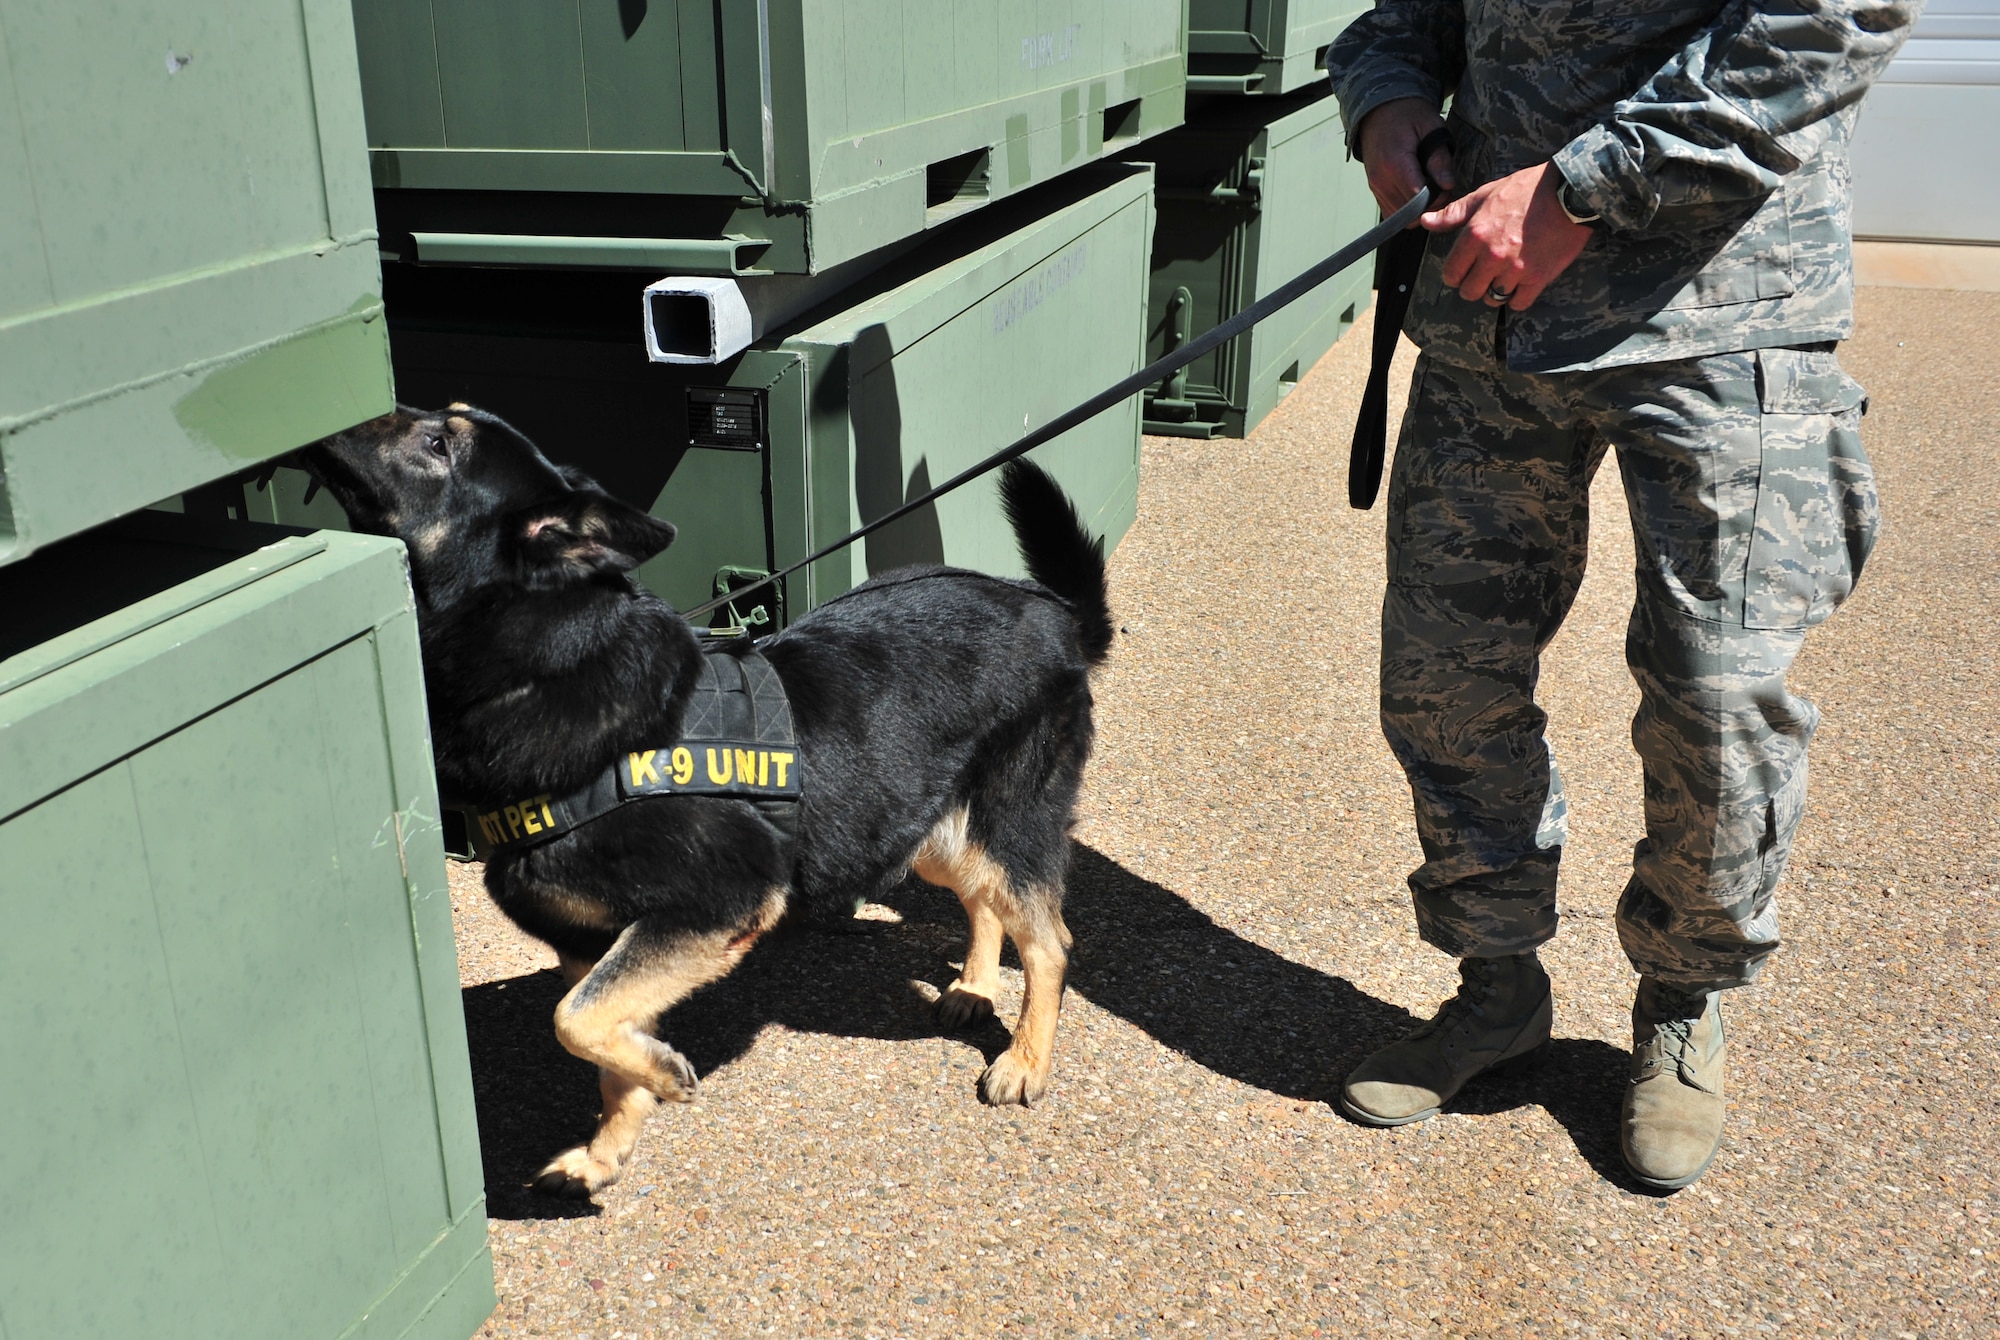 U.S. Air Force Staff Sgt. Adam Wylie, 27th Special Operations Security Forces Squadron military working dog handler, conducts a detection exercise with K-9 unit Dino K014 near a warehouse at Cannon Air Force Base, N.M., March 15, 2012. All K-9 units assigned to Cannon are dual purpose patrol and detections canines responsible for protecting base personnel and resources. (U.S. Air Force photo by Airman 1st Class Alexxis Pons Abascal)